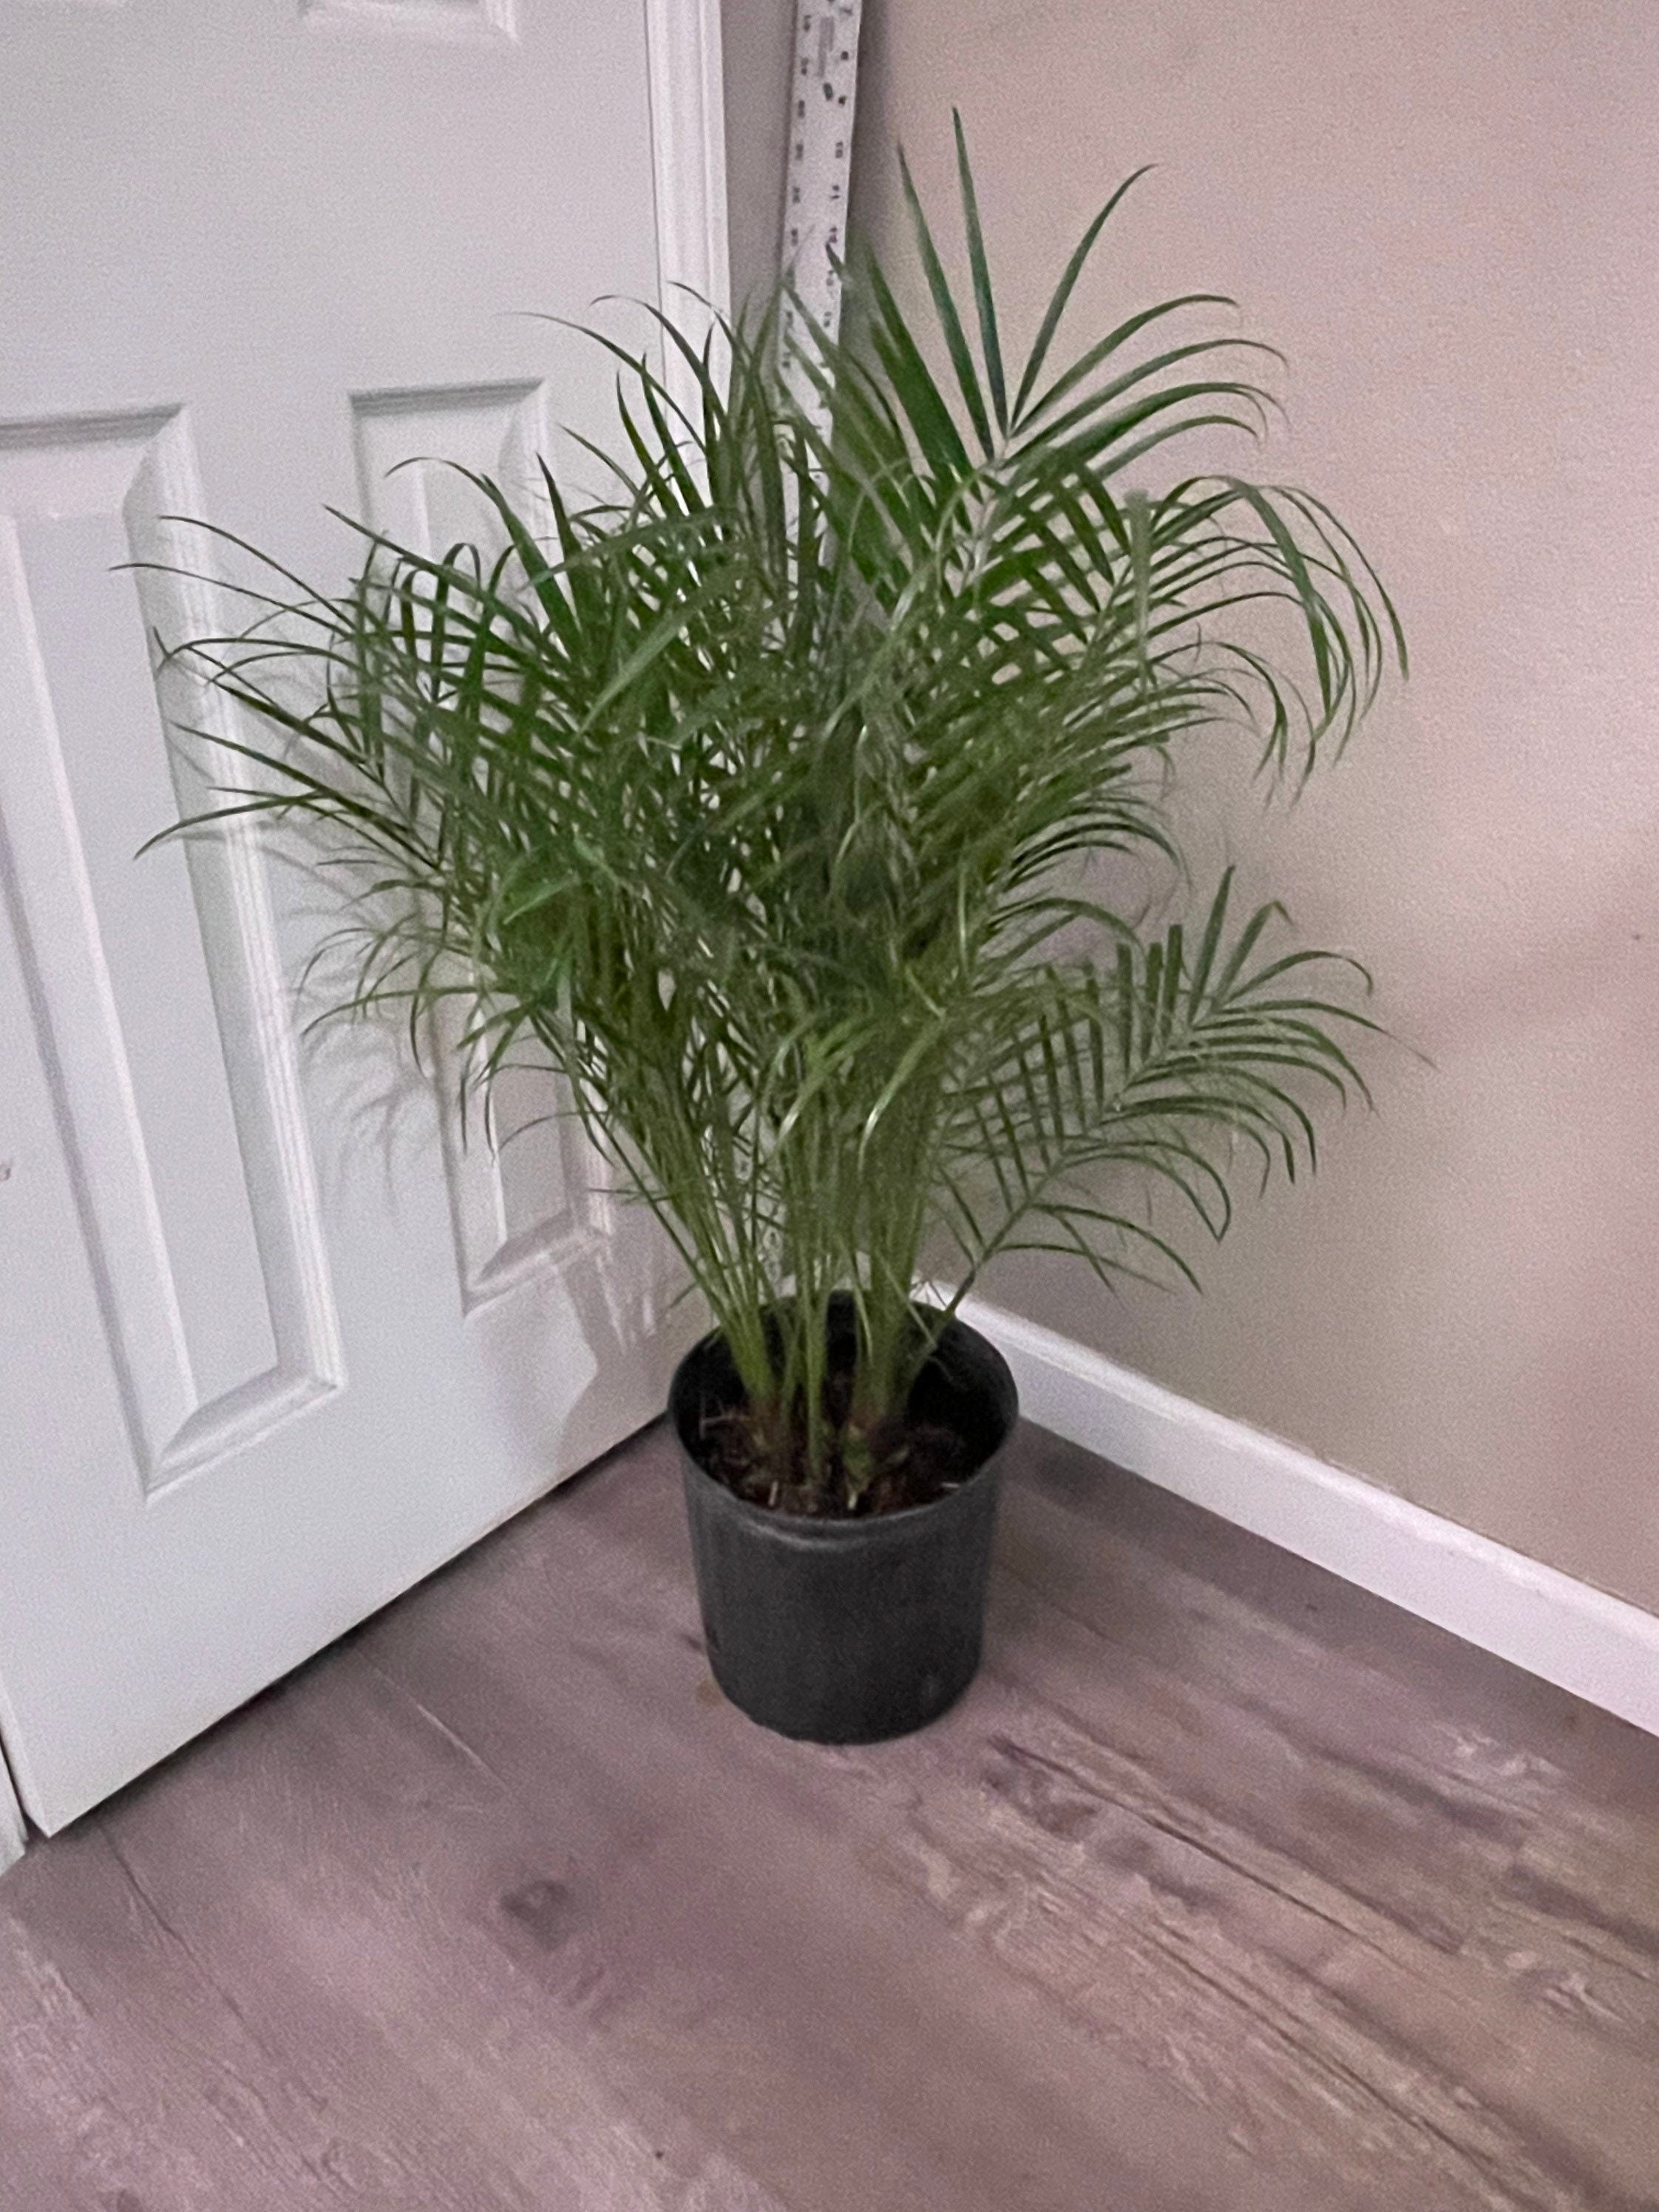 2-3 ft Tall -3 gallon multi trunk  -Roebellini-Pygmy Dare Palm -indoor or outdoor -low maintenance easy care